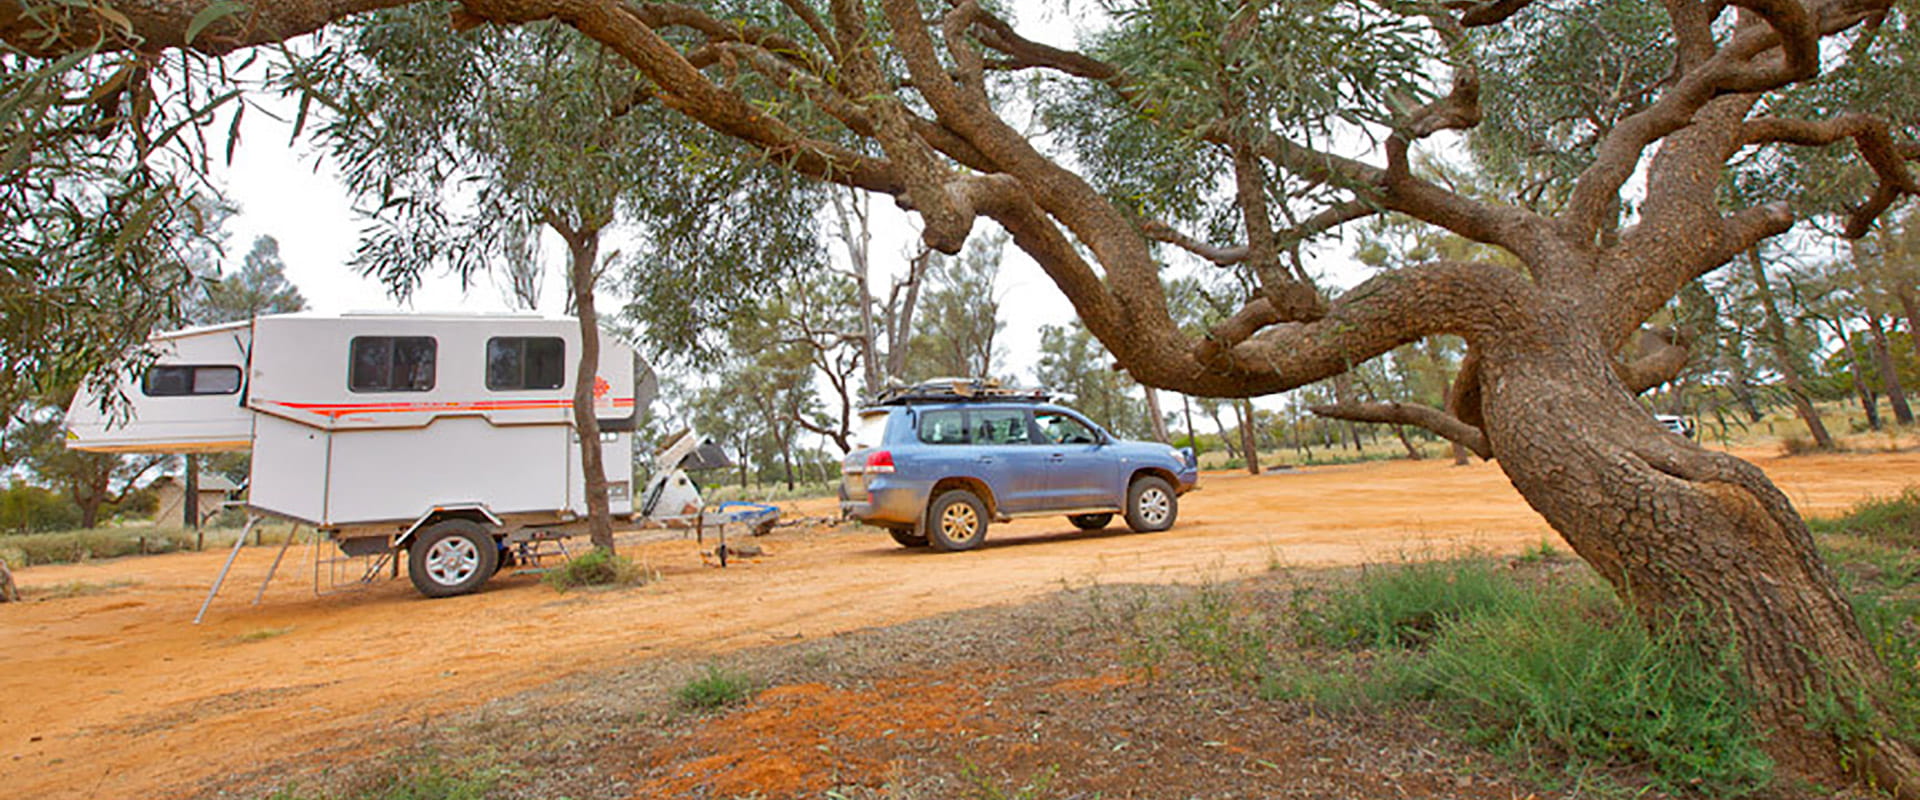 A white camper trailer attached to a blue SUV with a tree in the foreground.